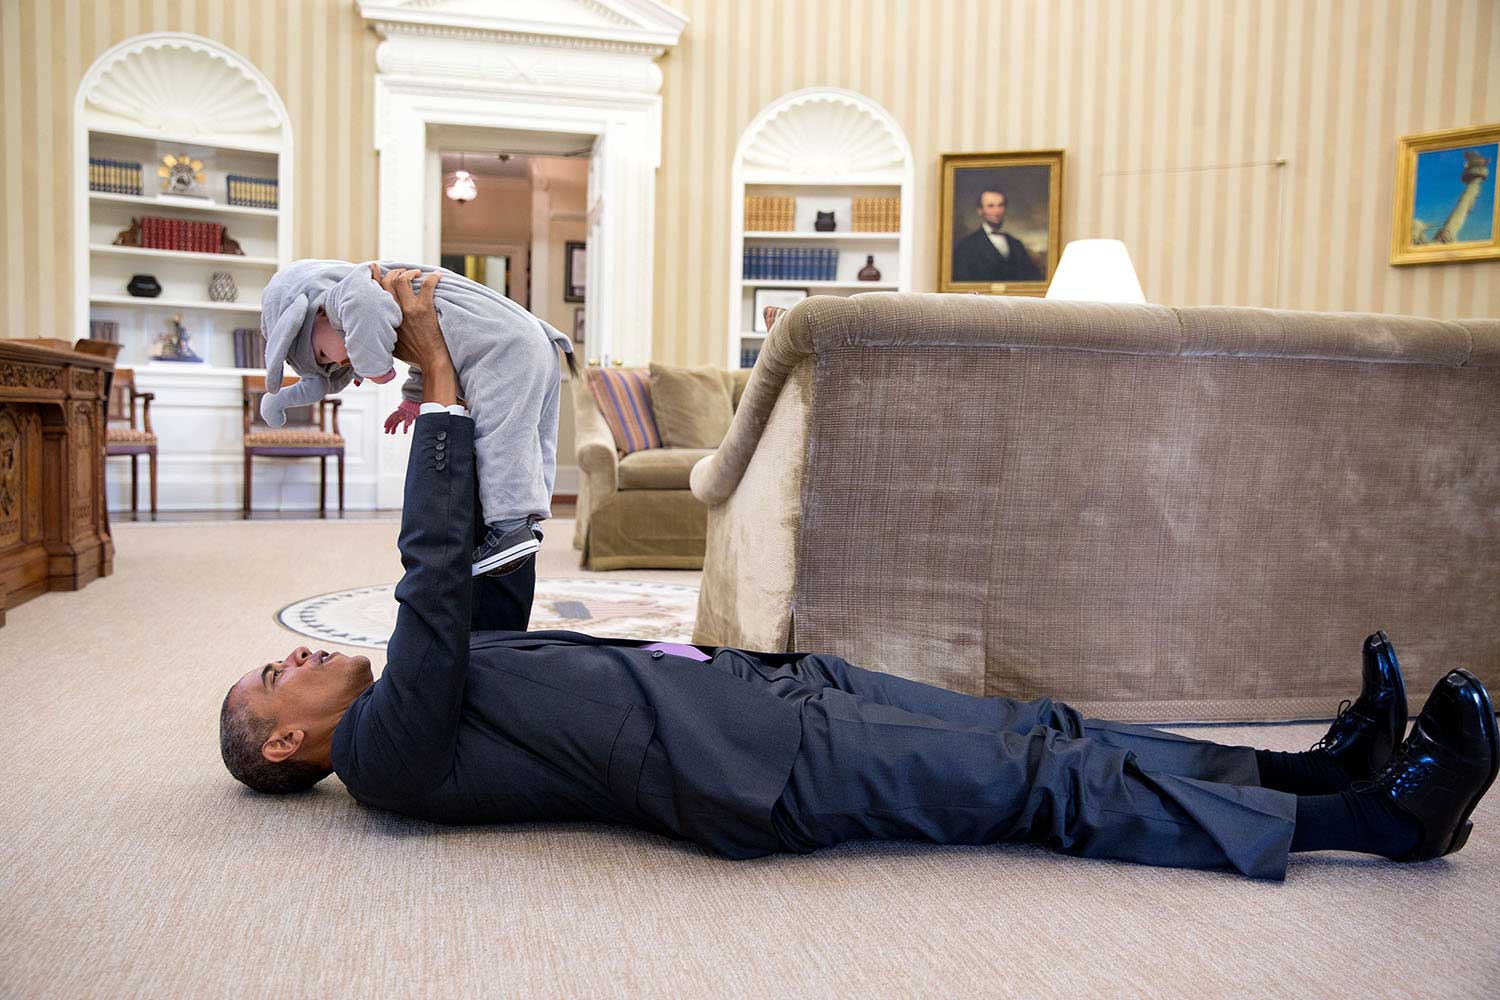 Benjamin Rhodes, Assistant to the President and Deputy National Security Advisor for Strategic Communications and Speechwriting 2009-Present:  
                              Selected this Souza photograph of the President playing with his daughter who is in a elephant costume.